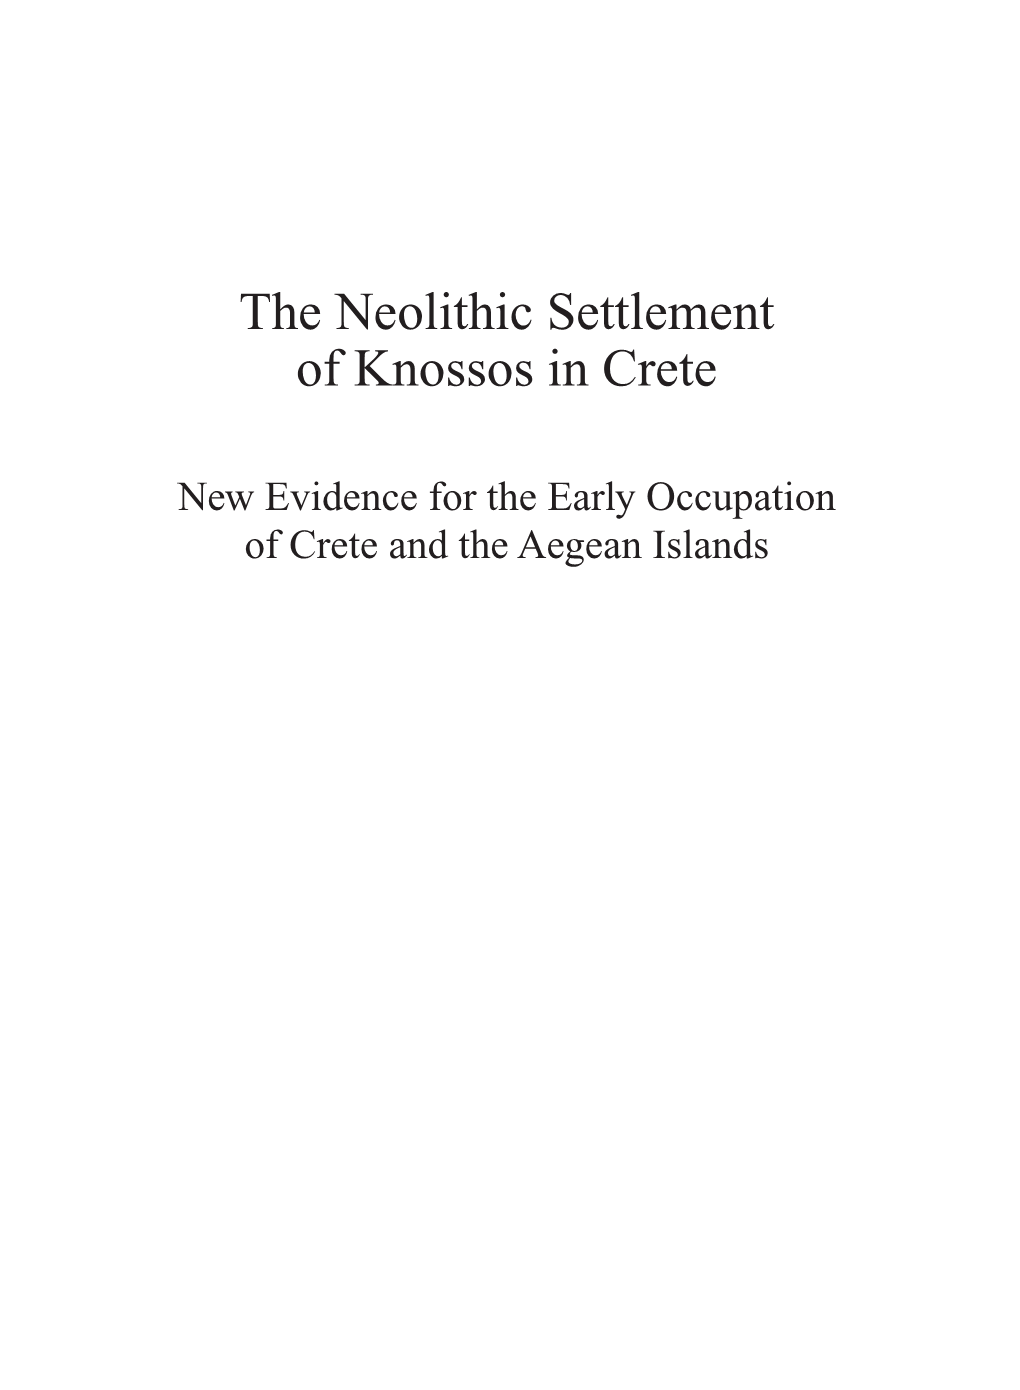 The Neolithic Settlement of Knossos in Crete